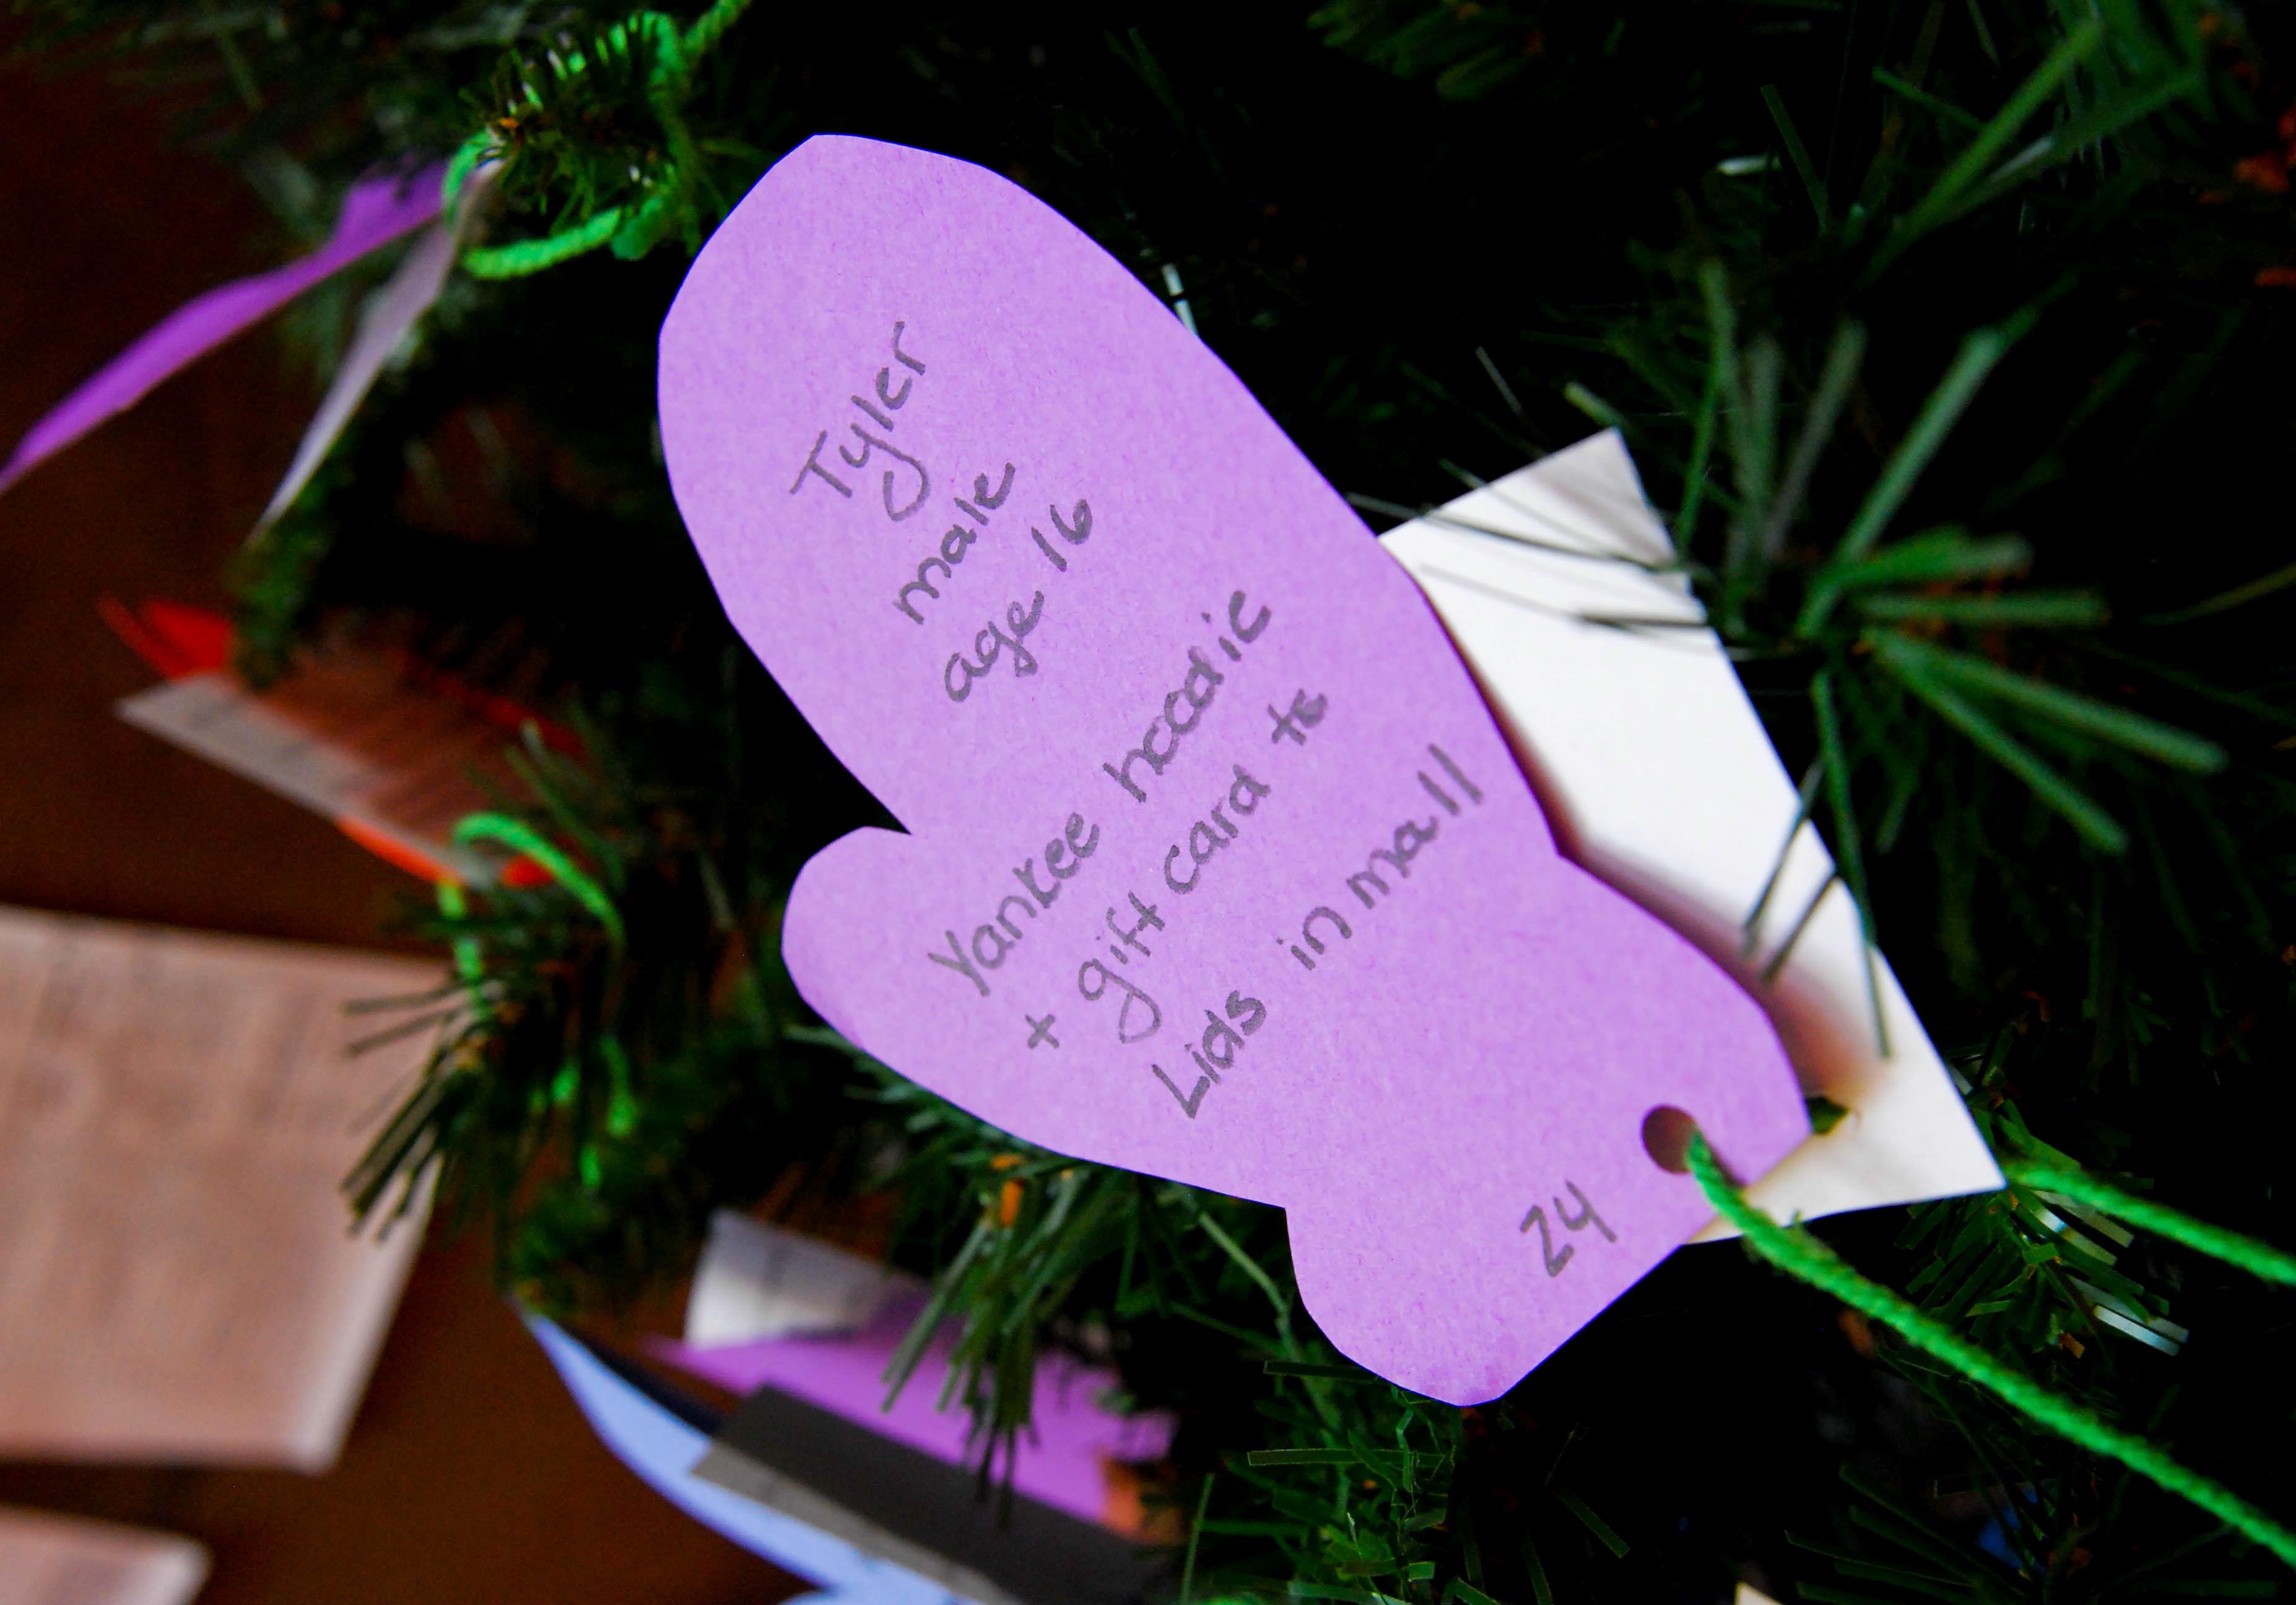 92 mittens are marked with children's holiday gift requests.